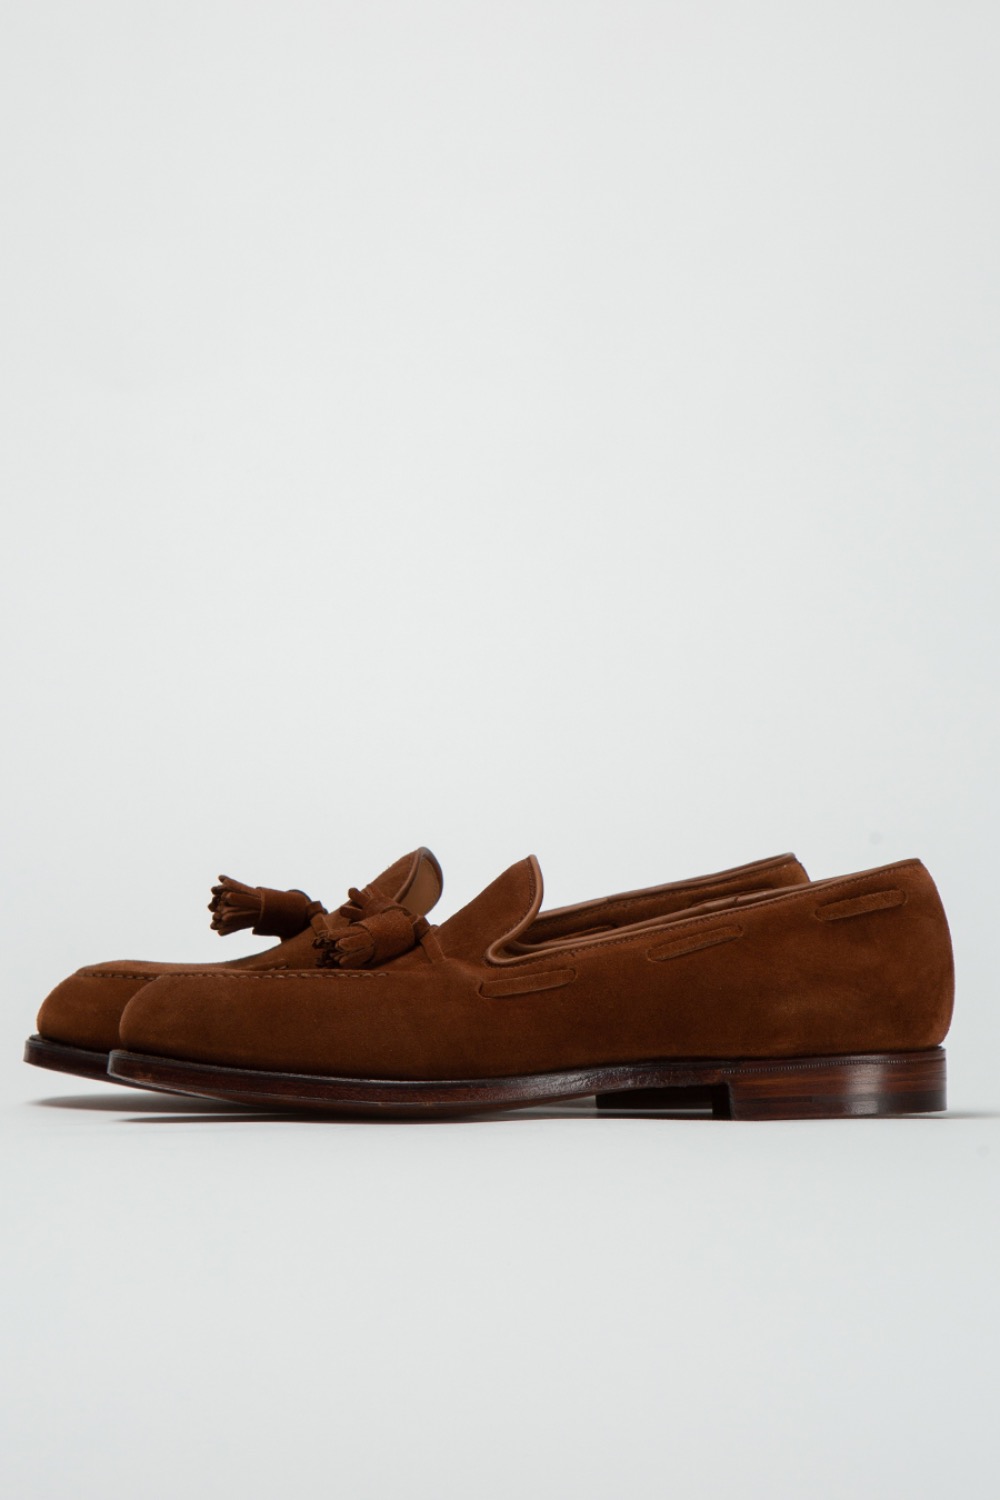 CAVENDISH 2 - POLO BROWN CALF SUEDE LEATHER SOLE